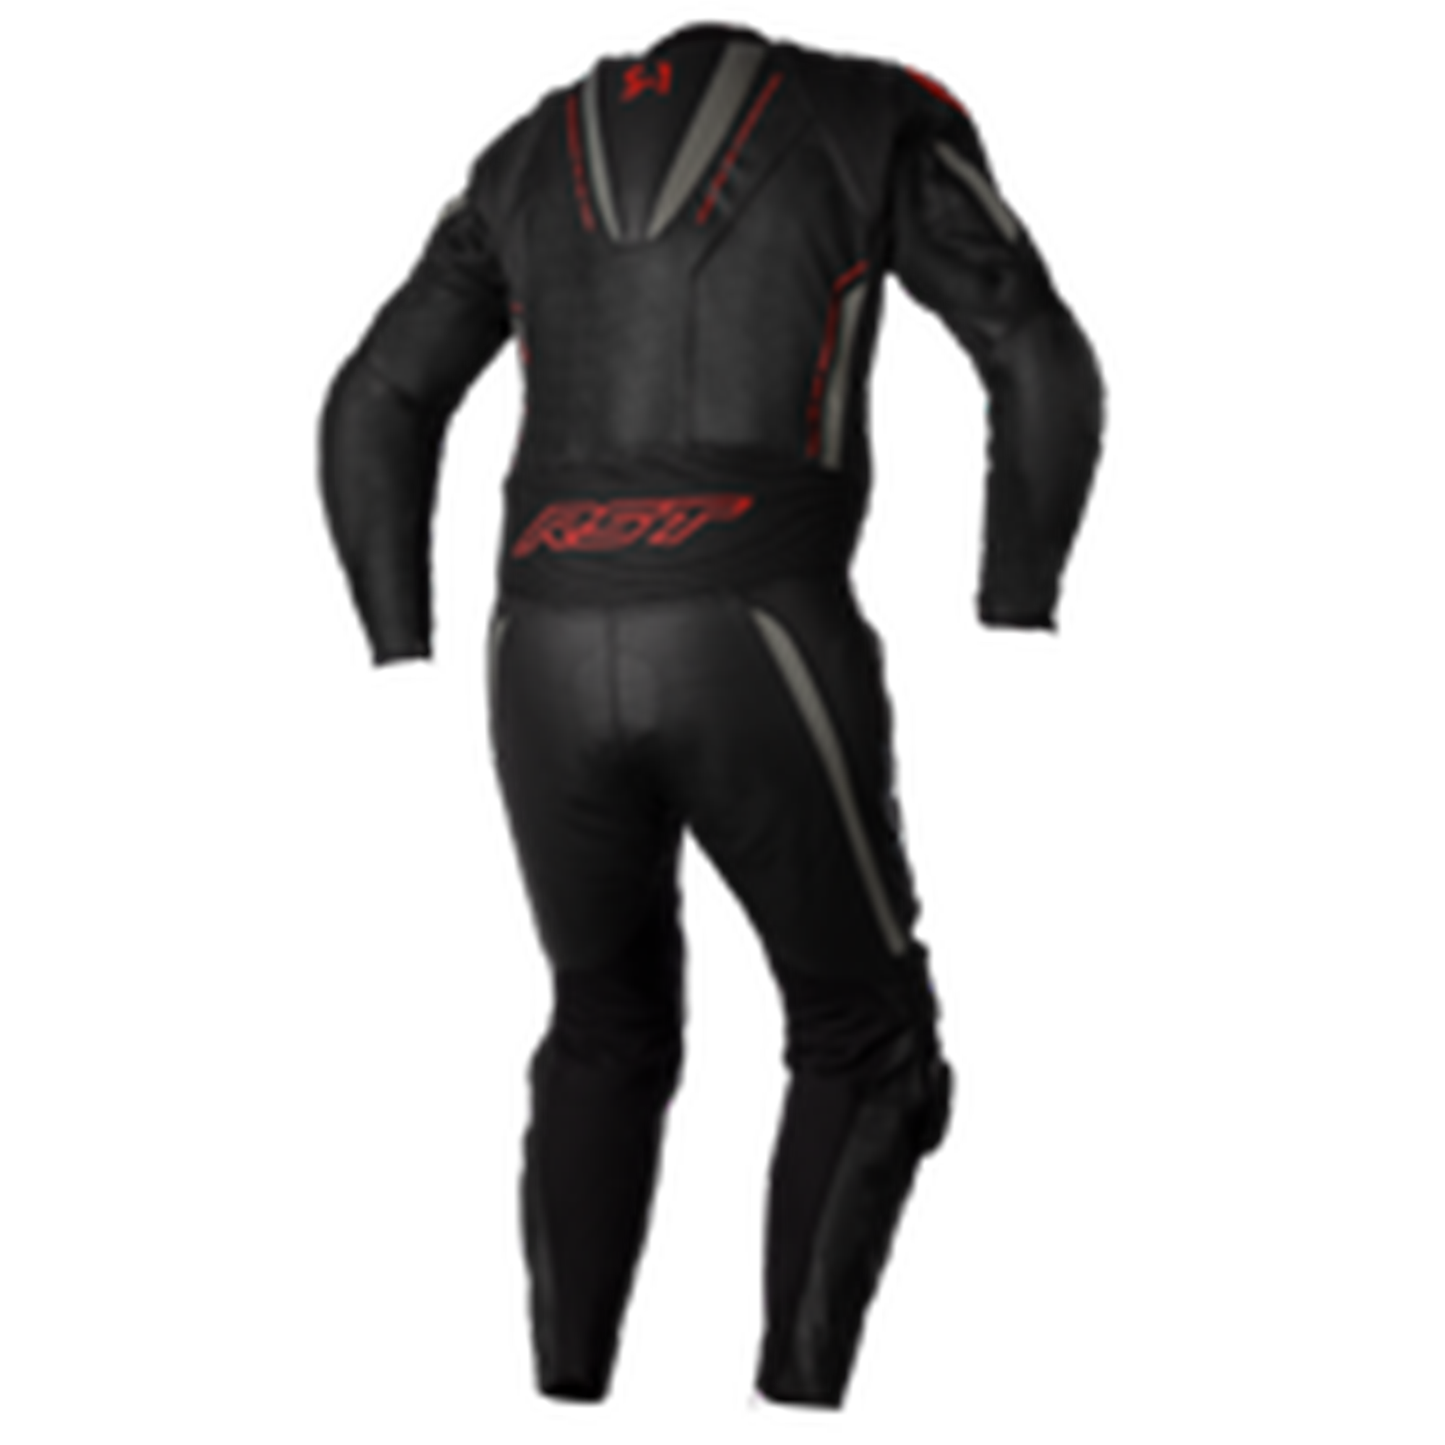 RST S1 Men's One Piece Leather Suit - Black/Grey/Red